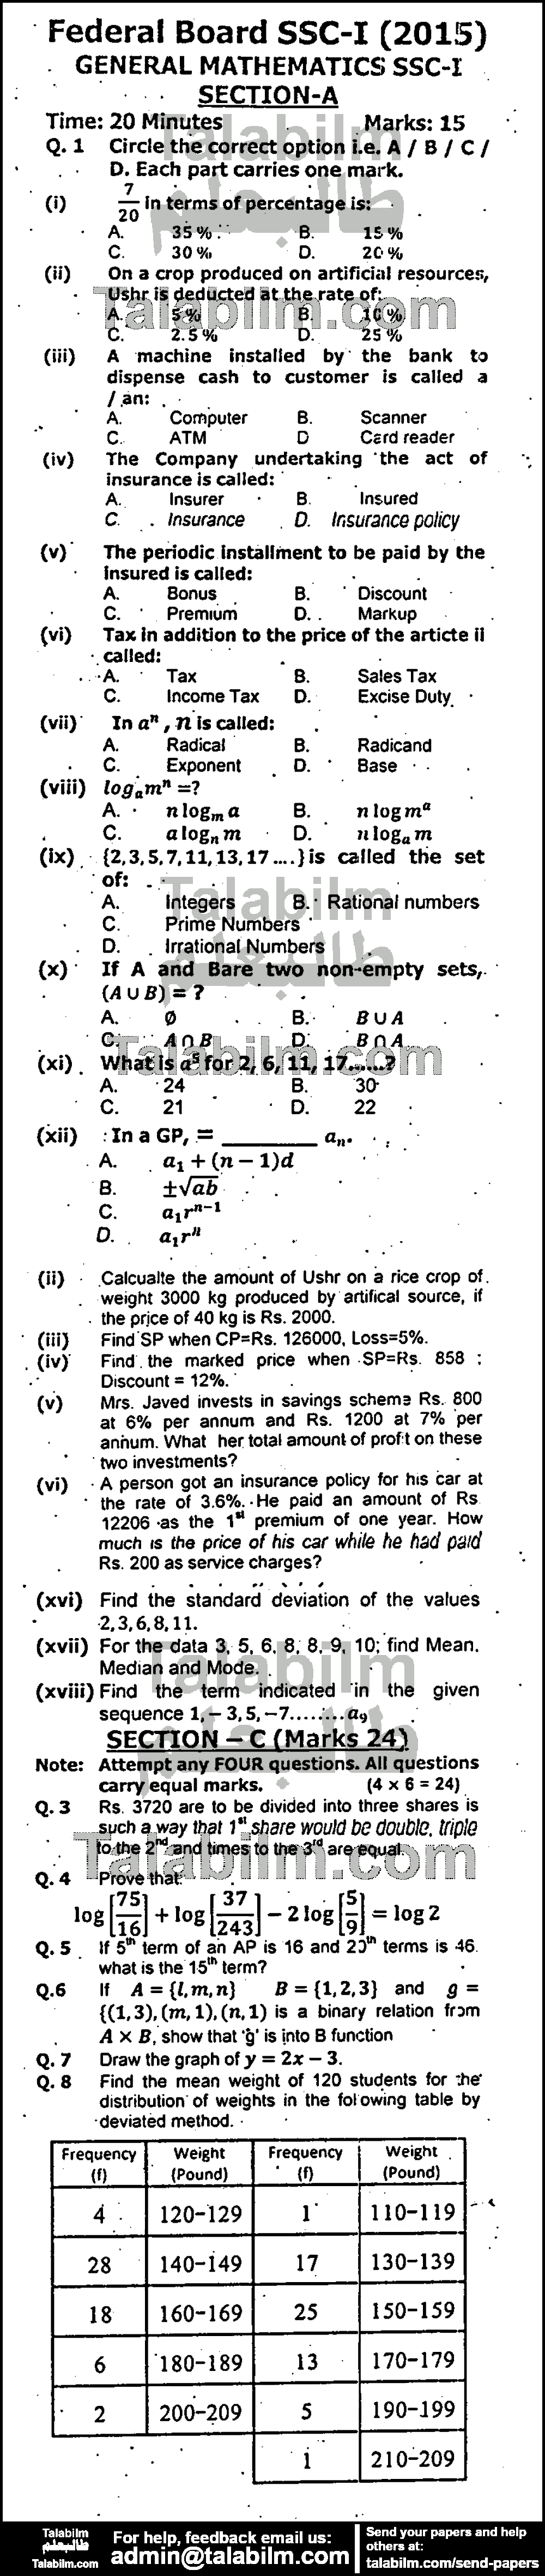 General Math 0 past paper for 2015 Group-I